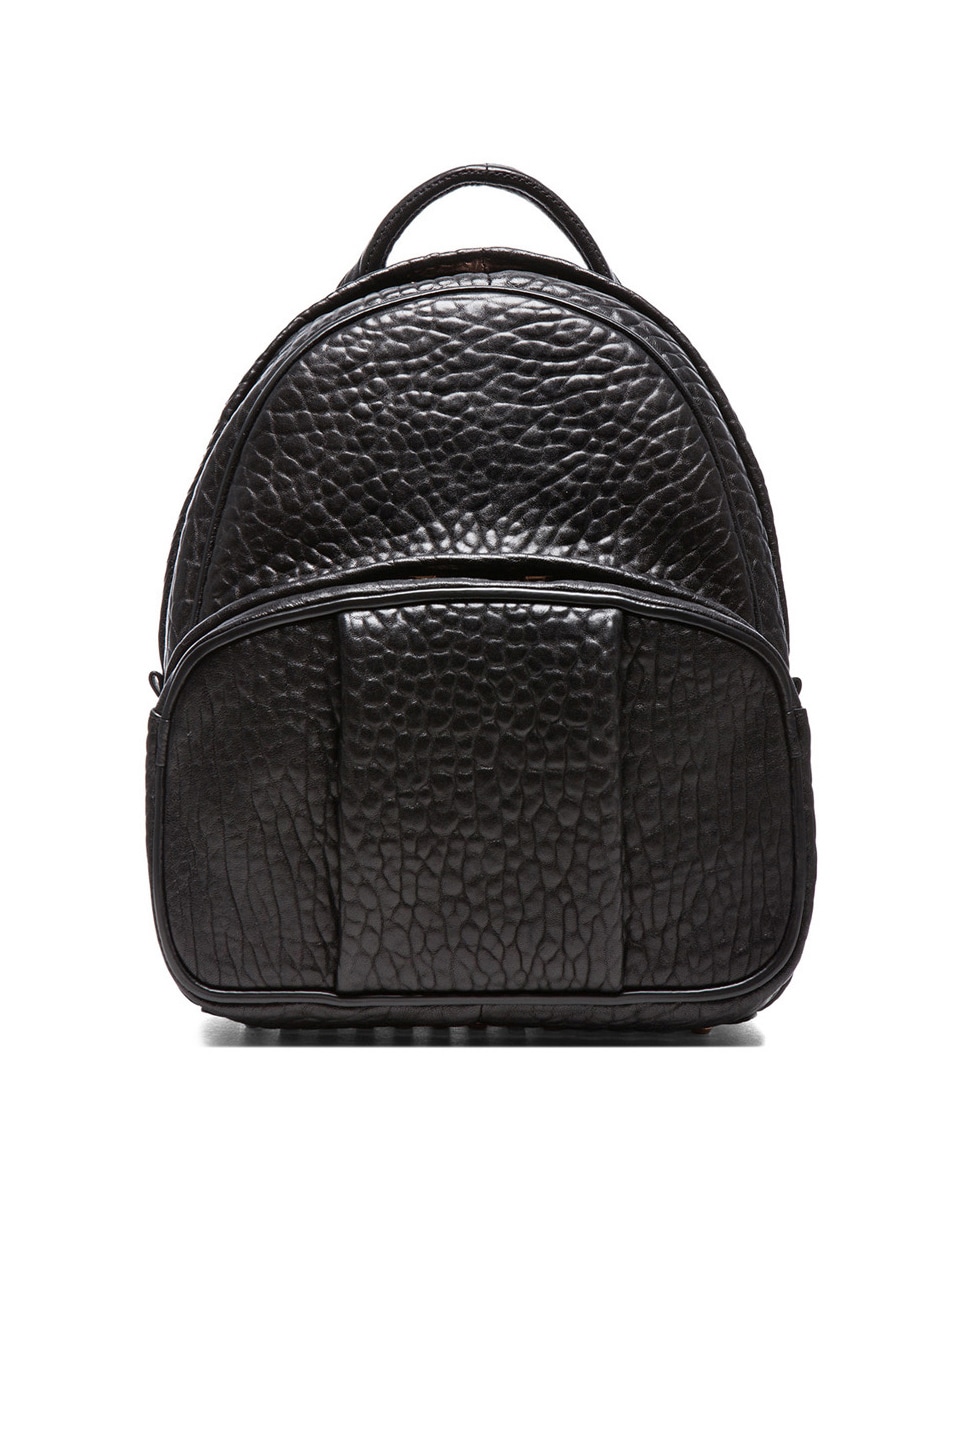 Alexander Wang Dumbo Backpack with Rose Gold Hardware in Black | FWRD